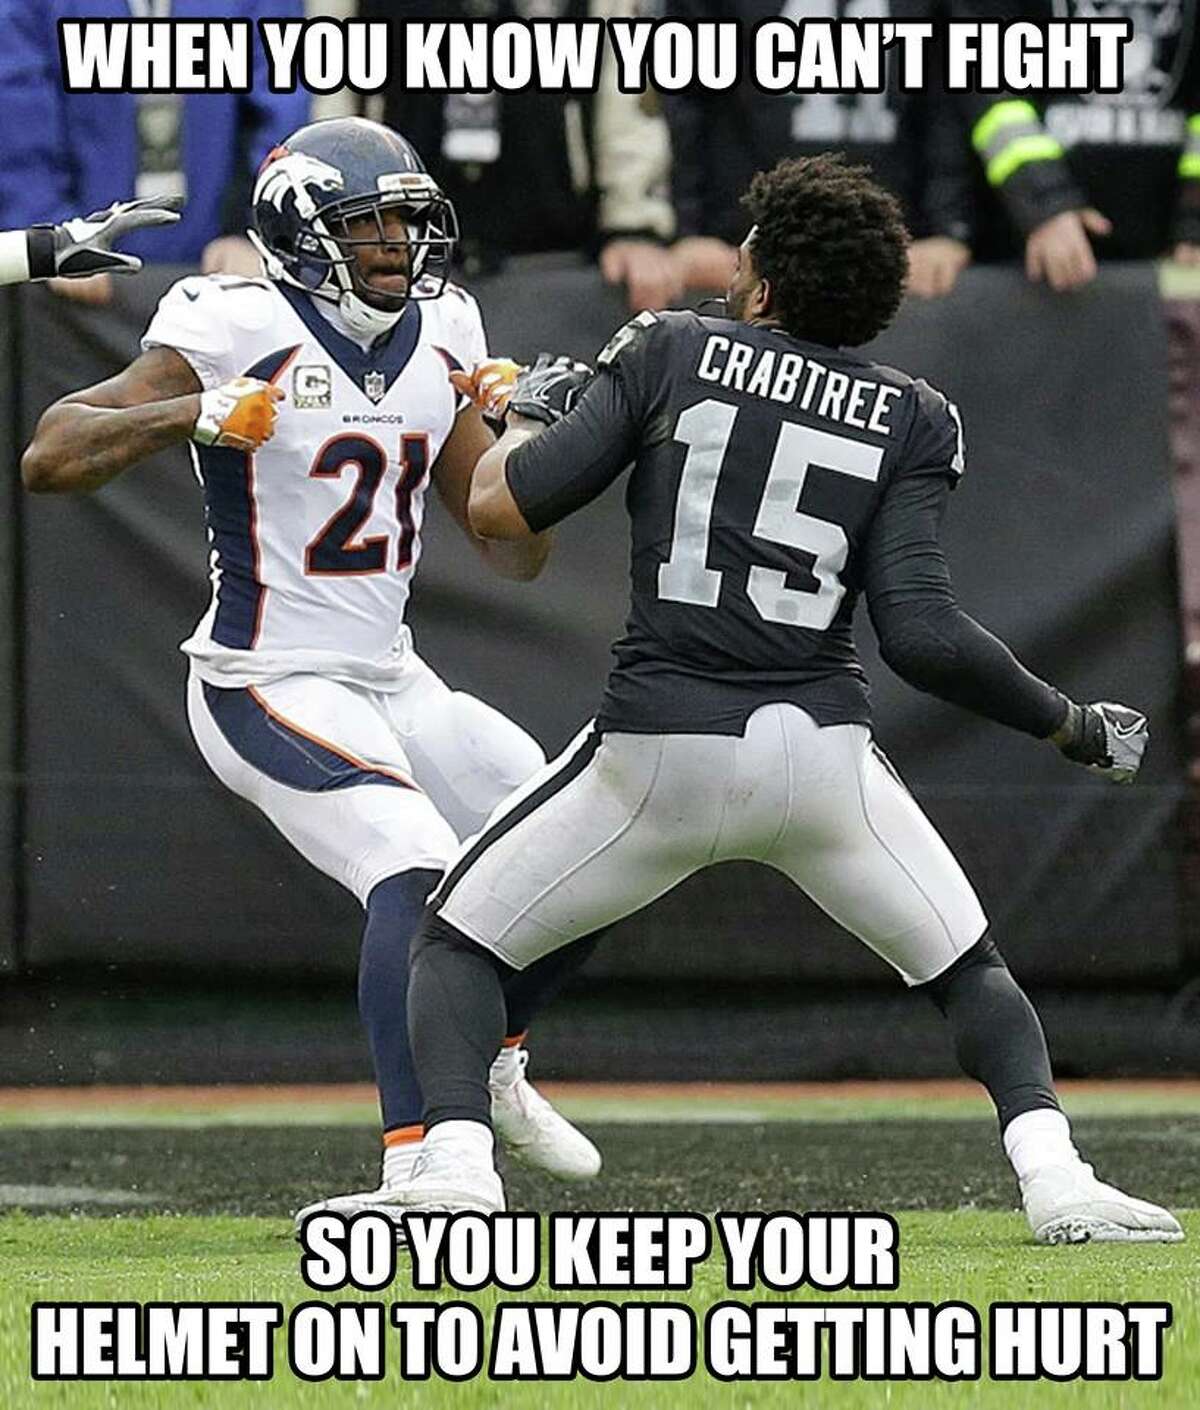 PHOTOS: The best memes from Week 12 of the NFL season Source: NFL memes Browse through the photos for a look at the best memes from Week 12 of the NFL season.